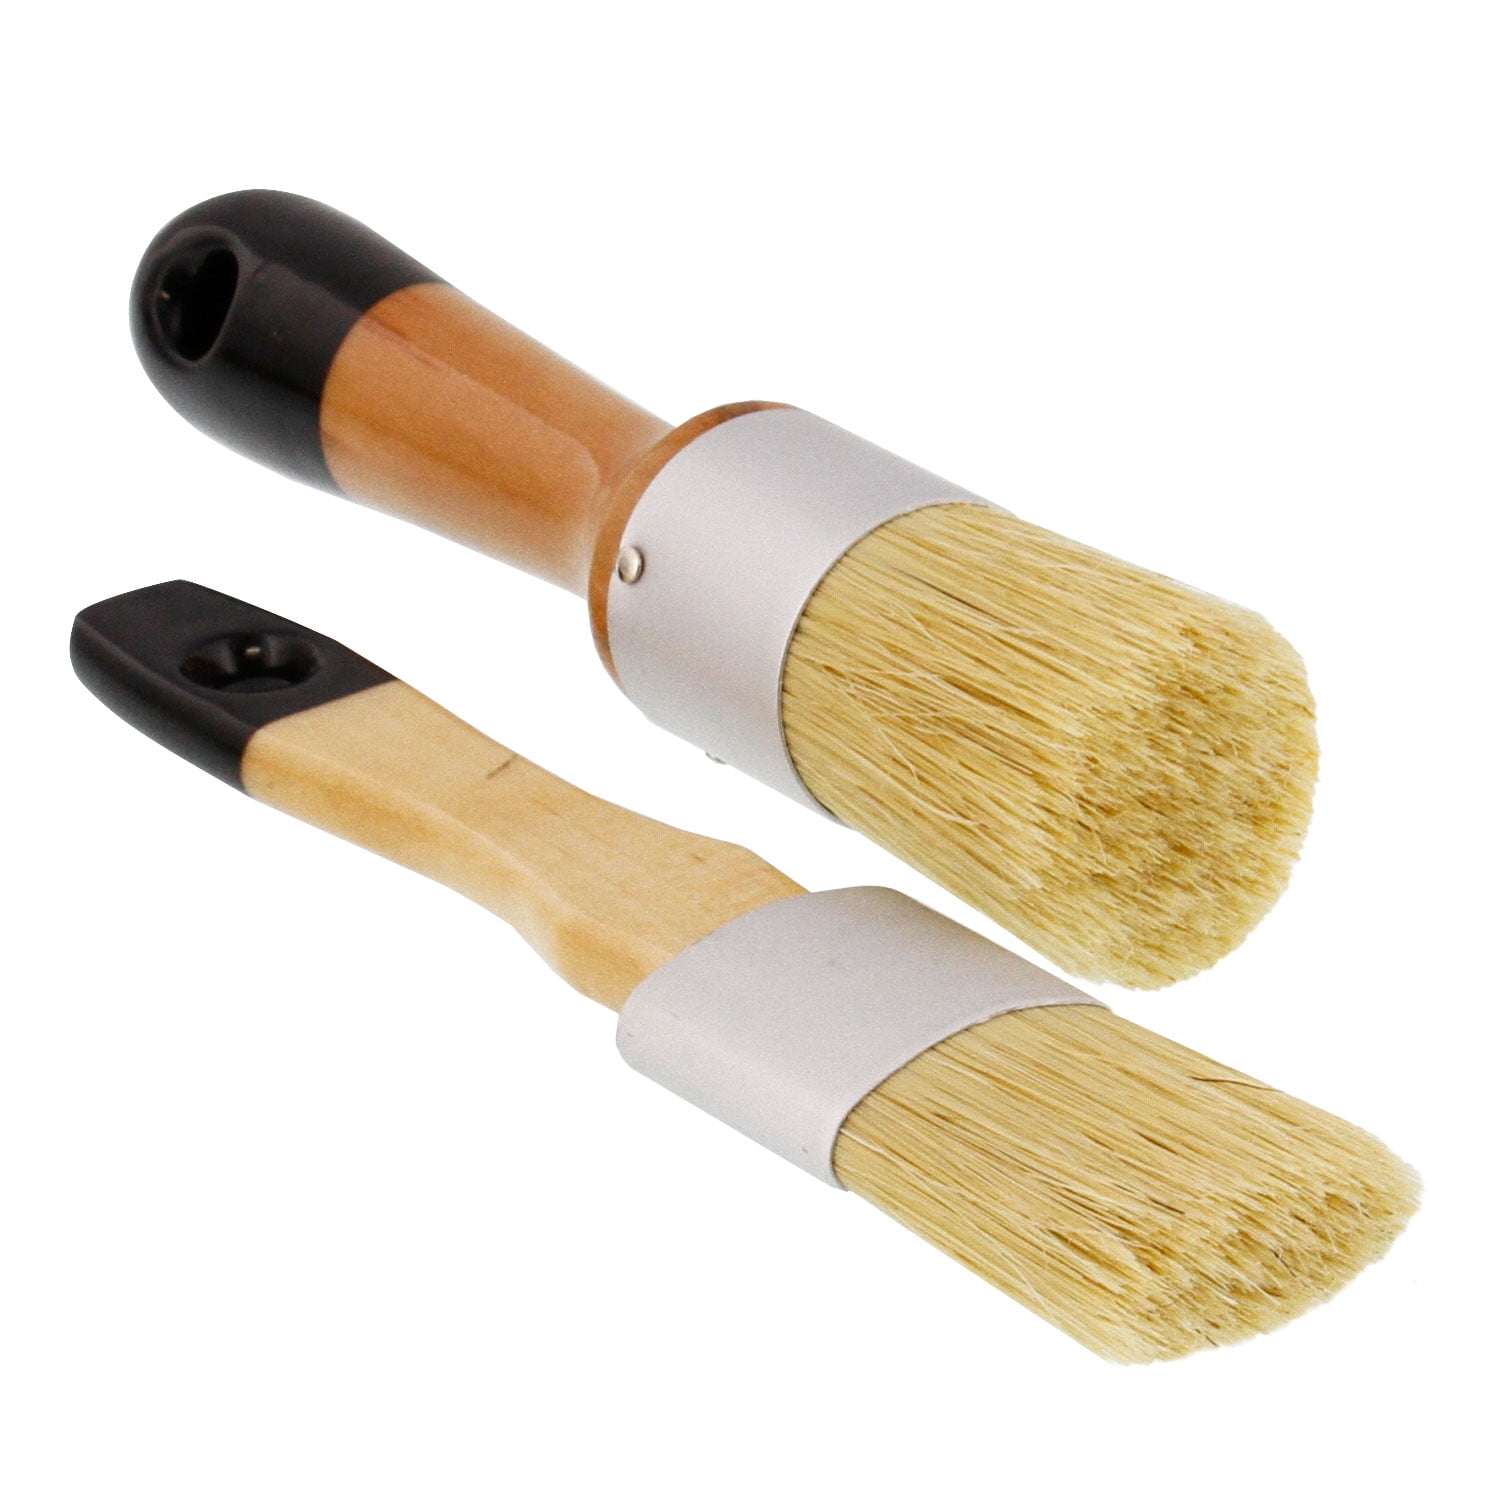 2 Pack Wax Painting Tool Large 2-in-1 Round Natural Bristles for DIY Furniture Home Decor bzczh Chalk Paint Brush Stencil Brush Finishing Wood Projects 